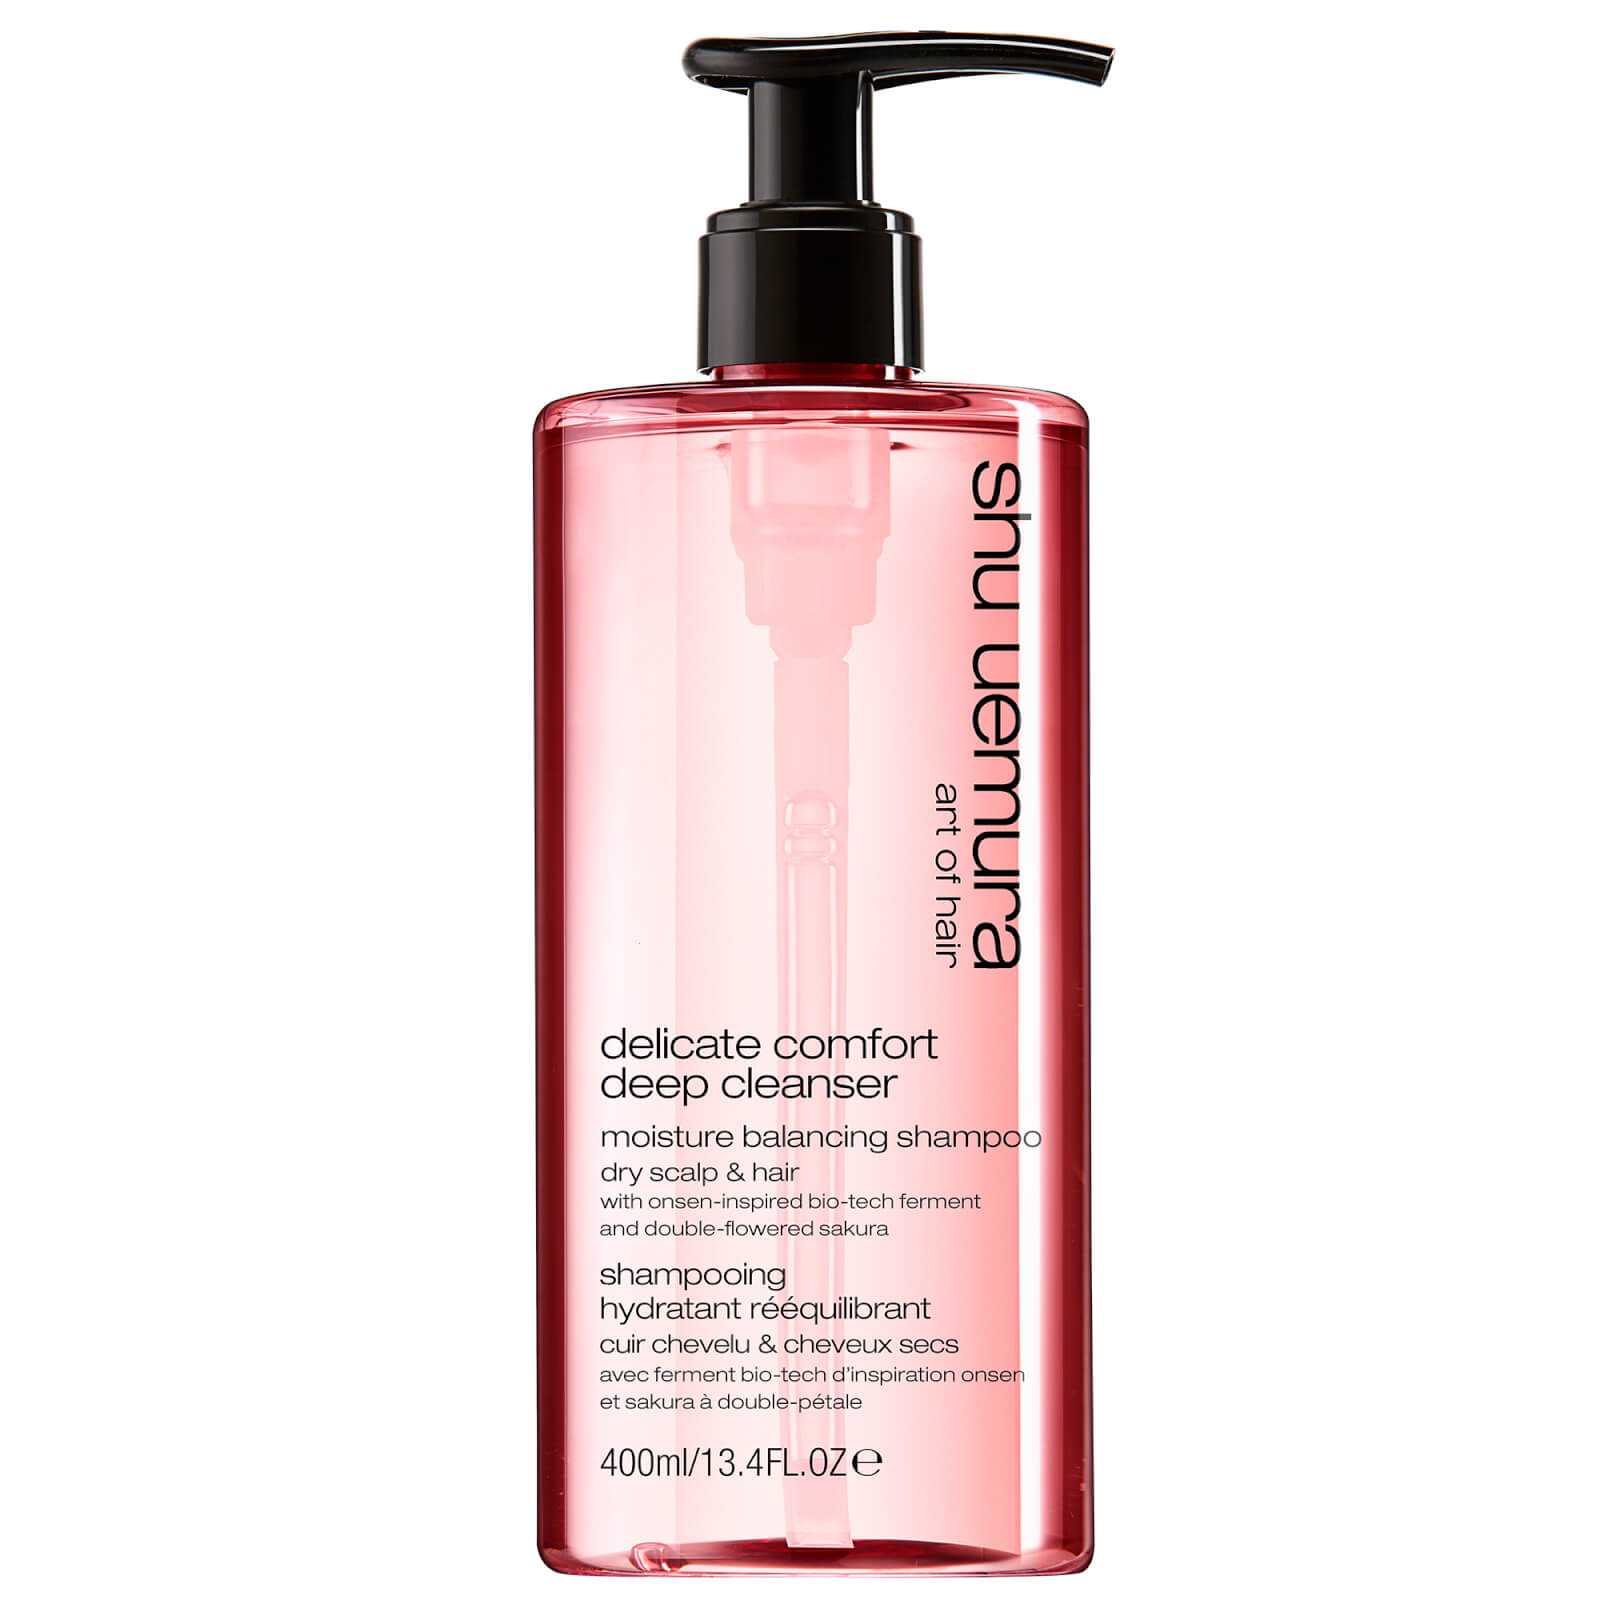 Photos - Facial / Body Cleansing Product Shu Uemura Art of Hair Delicate Comfort Cleansing Oil 400ml E3853200